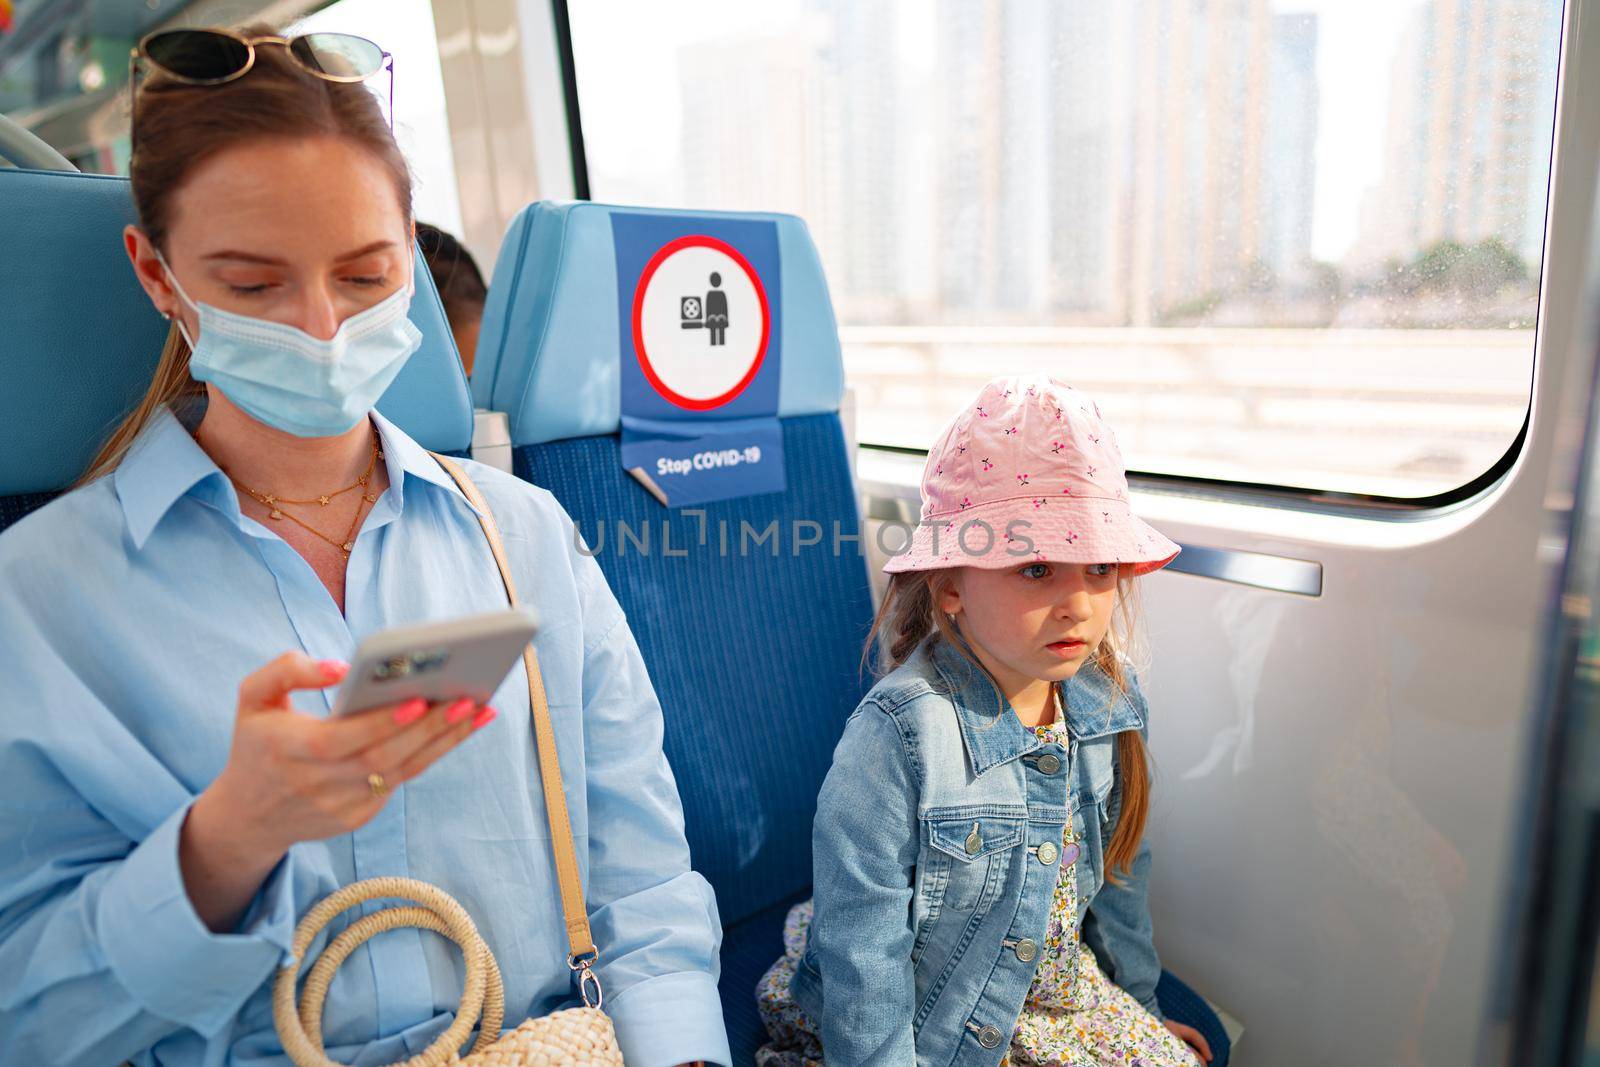 Dubai, United Arab Emirates - MARCH, 2020: Woman in face mask and her little daughter sitting in carriage of Dubai metro